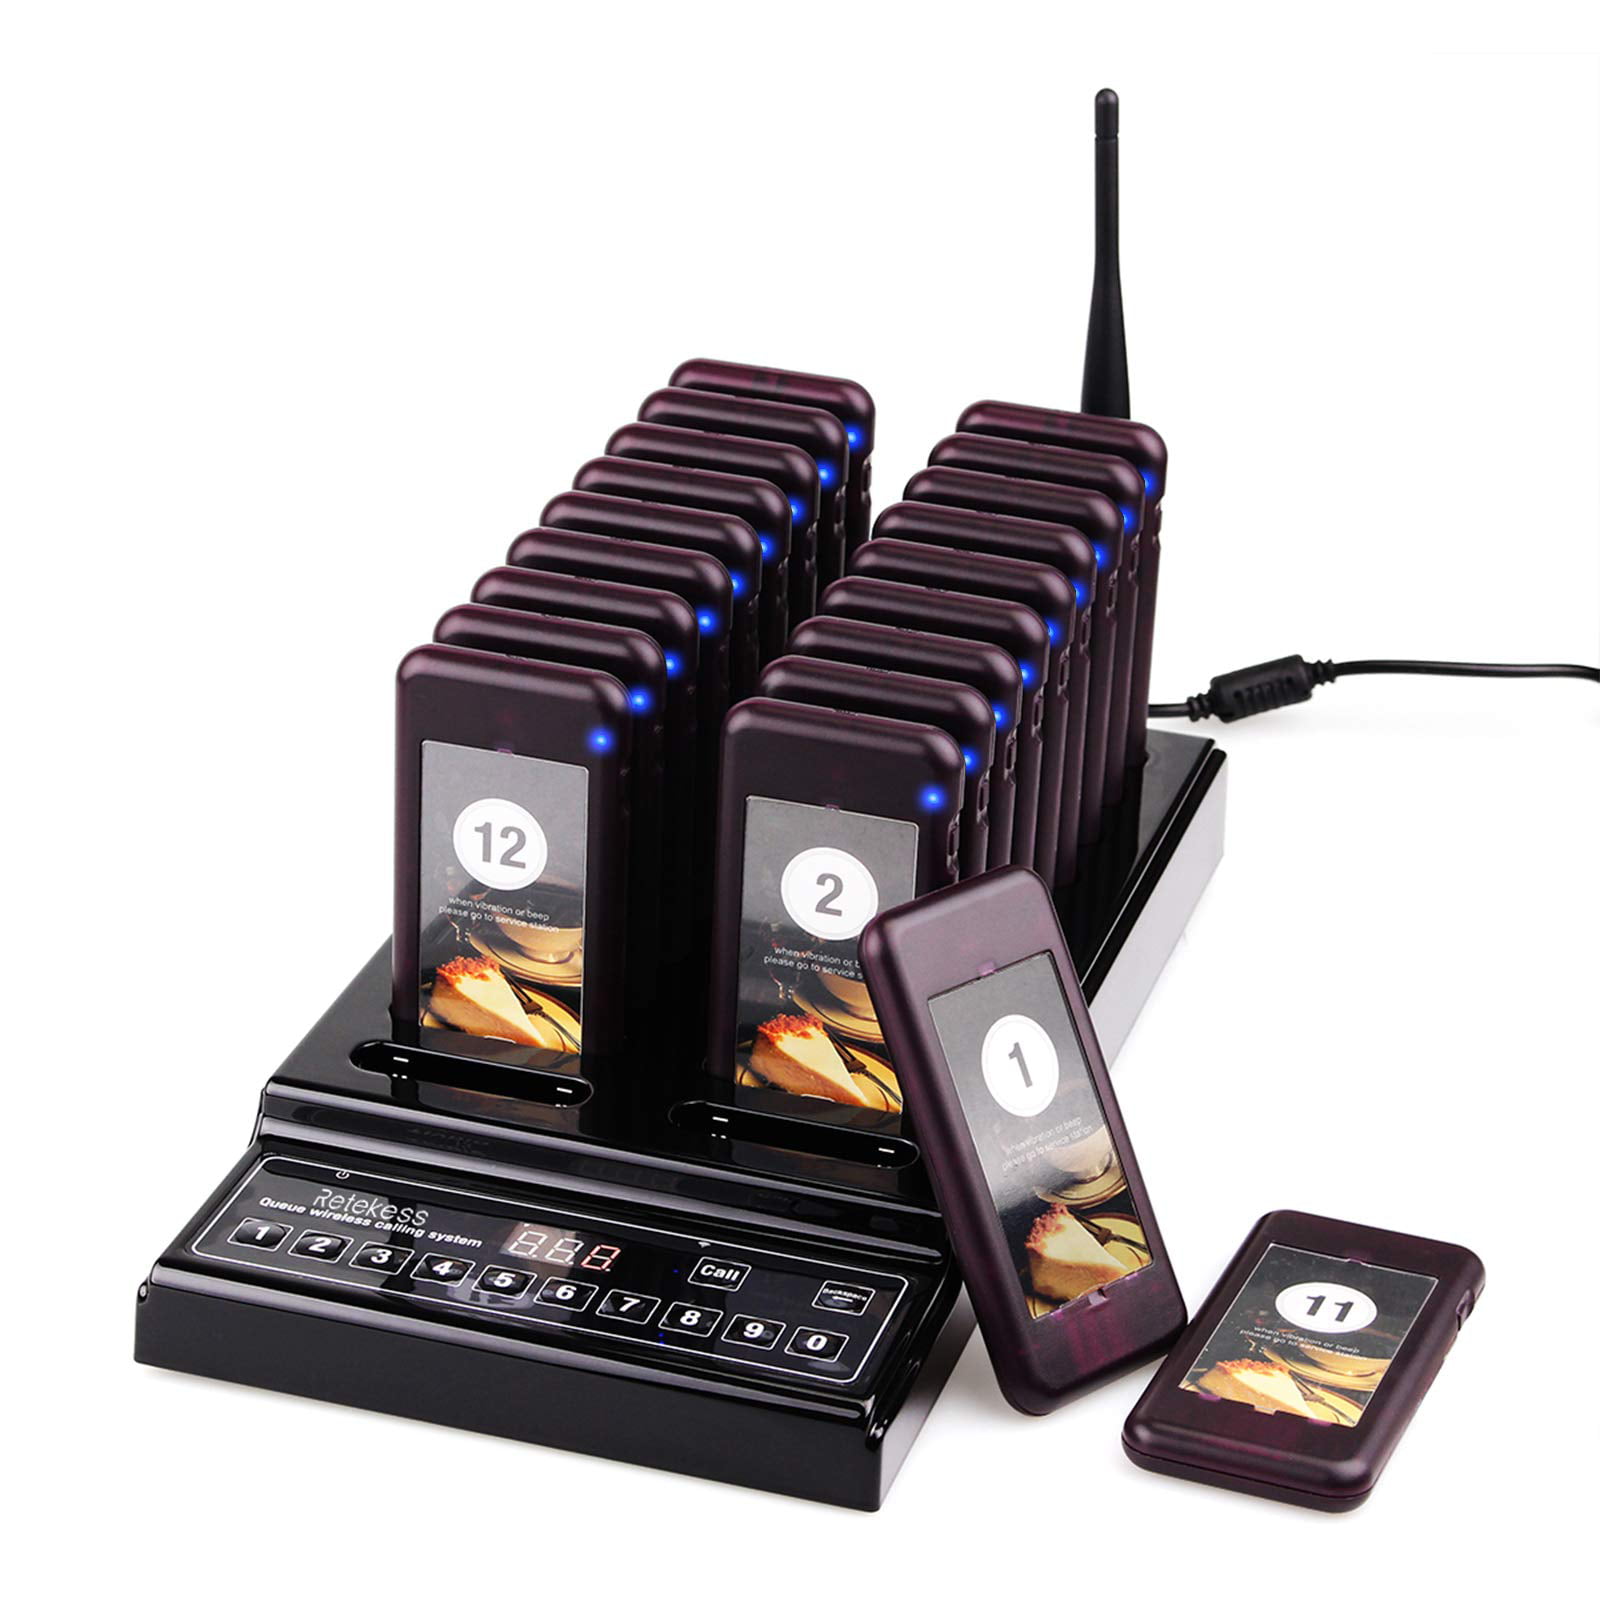 10 Mahogany Gold Wireless Pager Details about   Restaurant Paging System Black Mobile Receiver